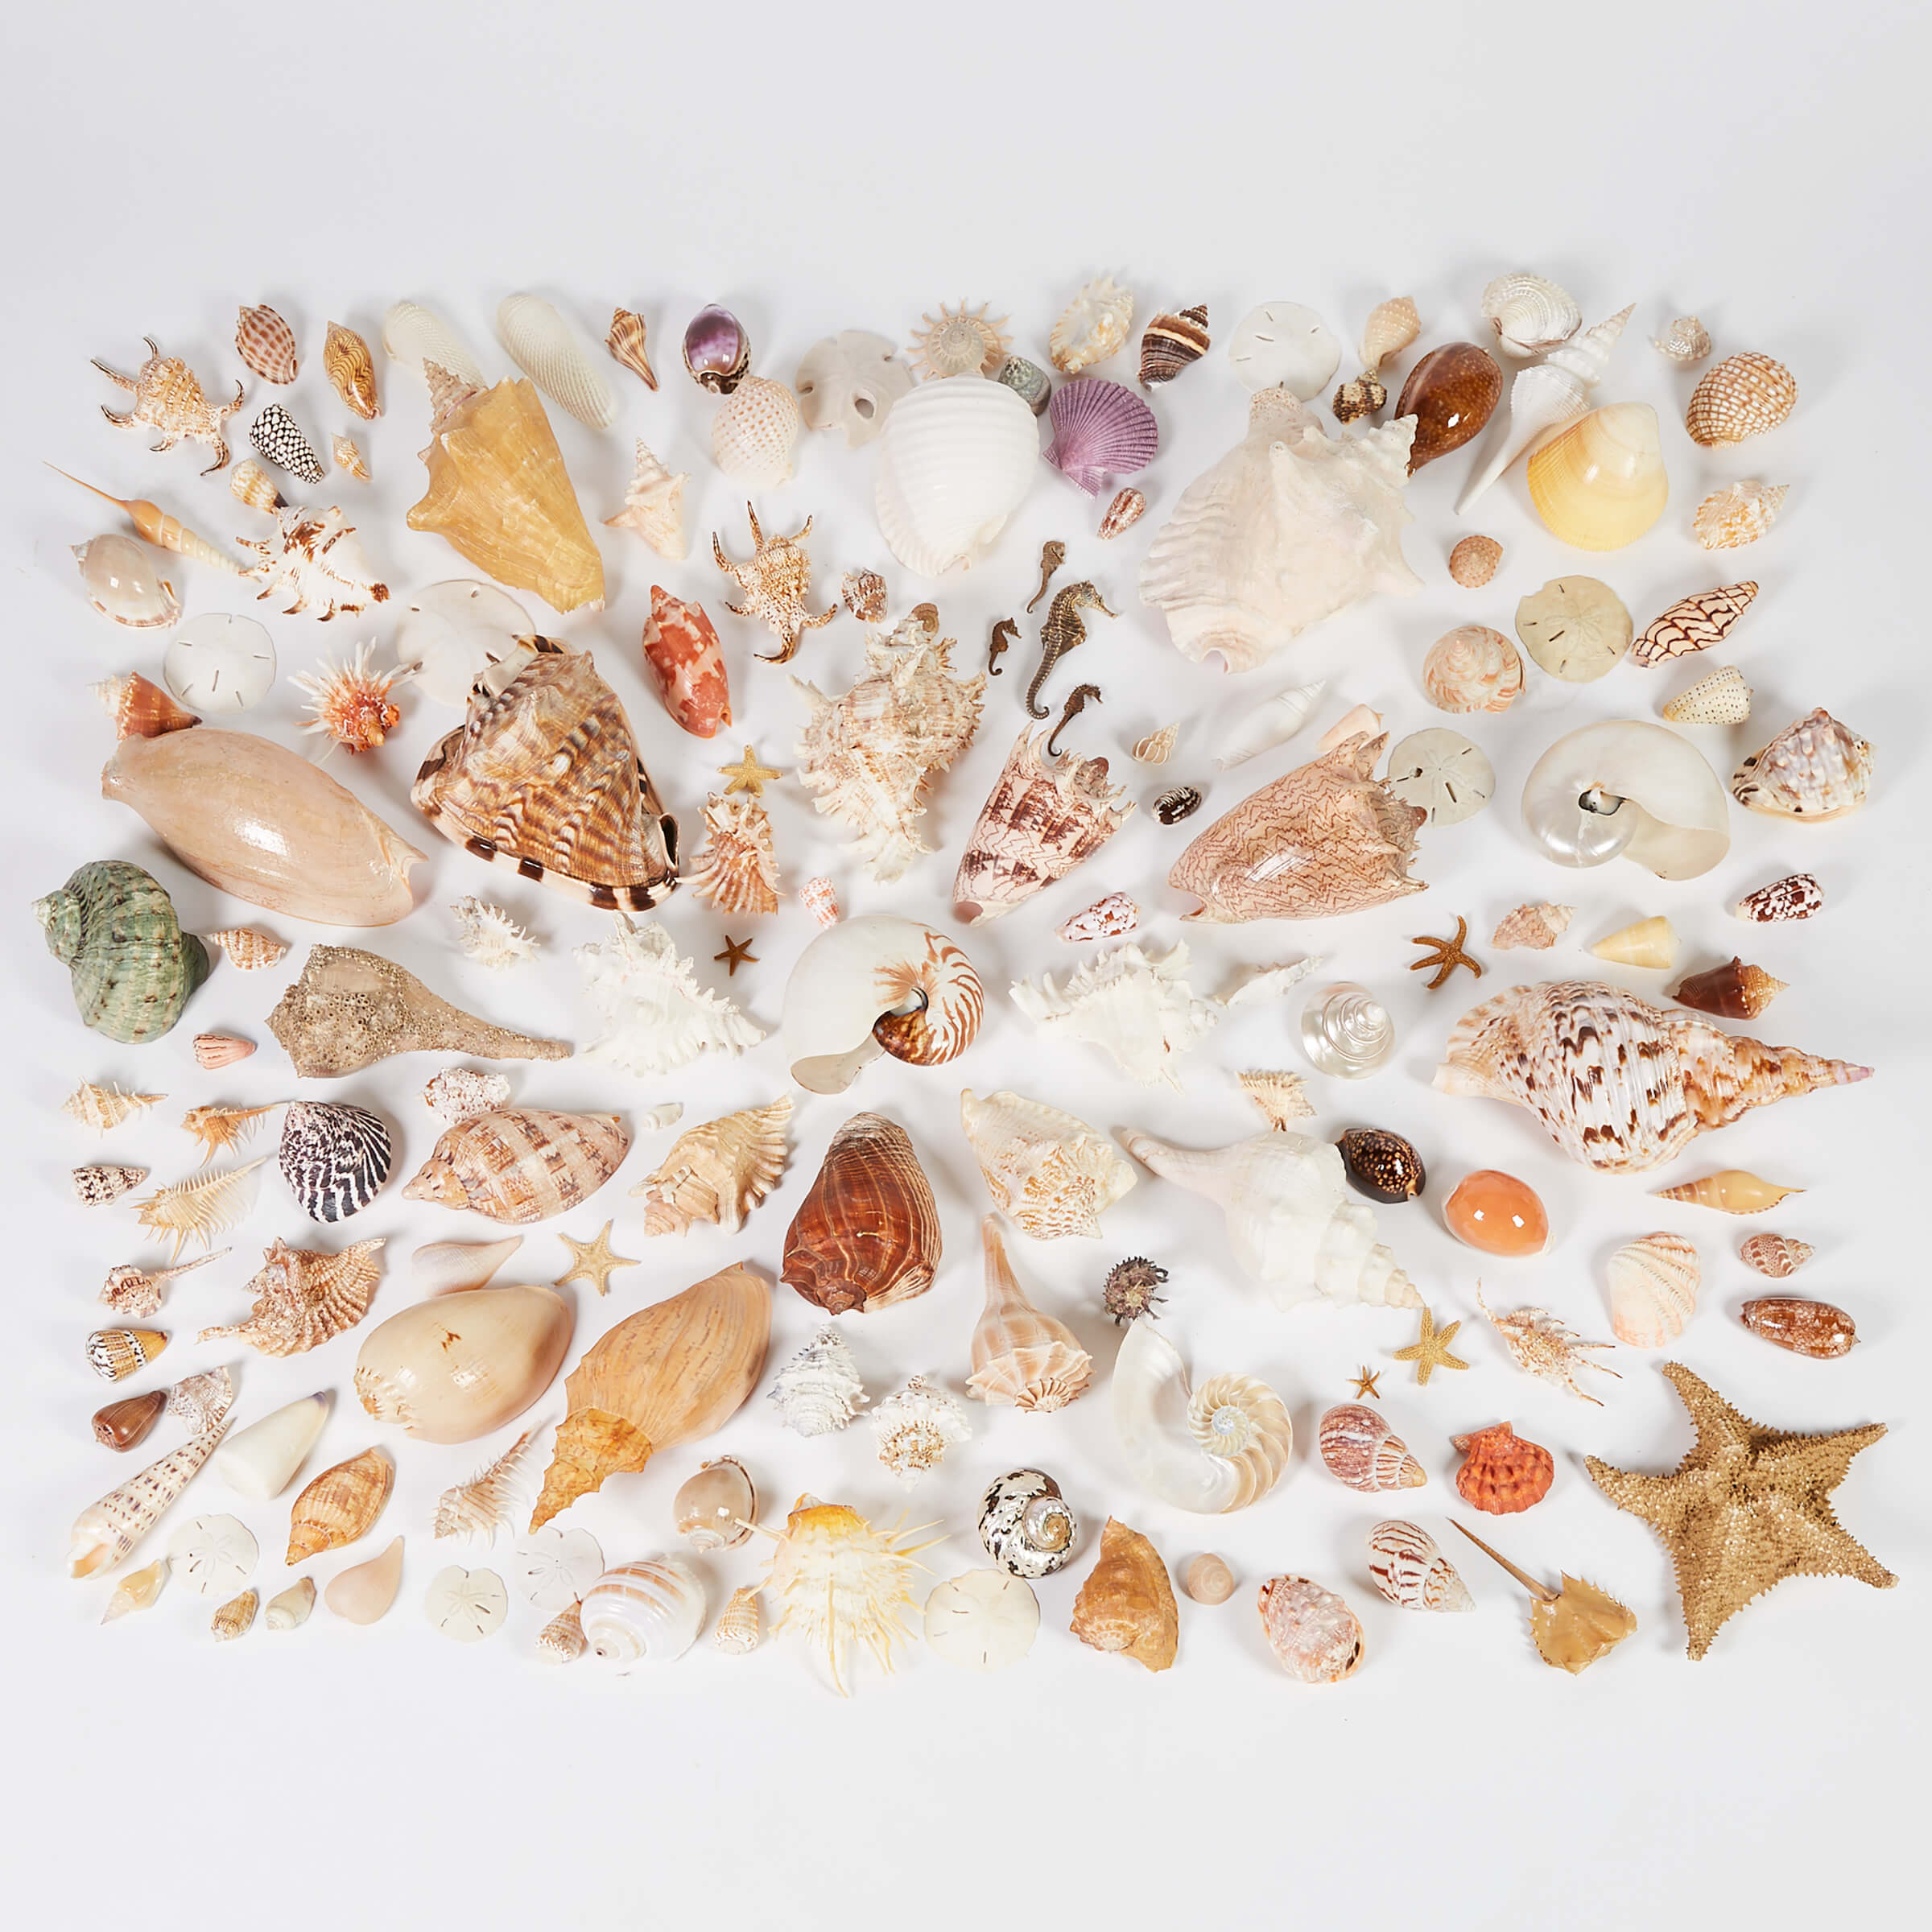 Conchology: Extensive Collection of Sea Shells, 20th century